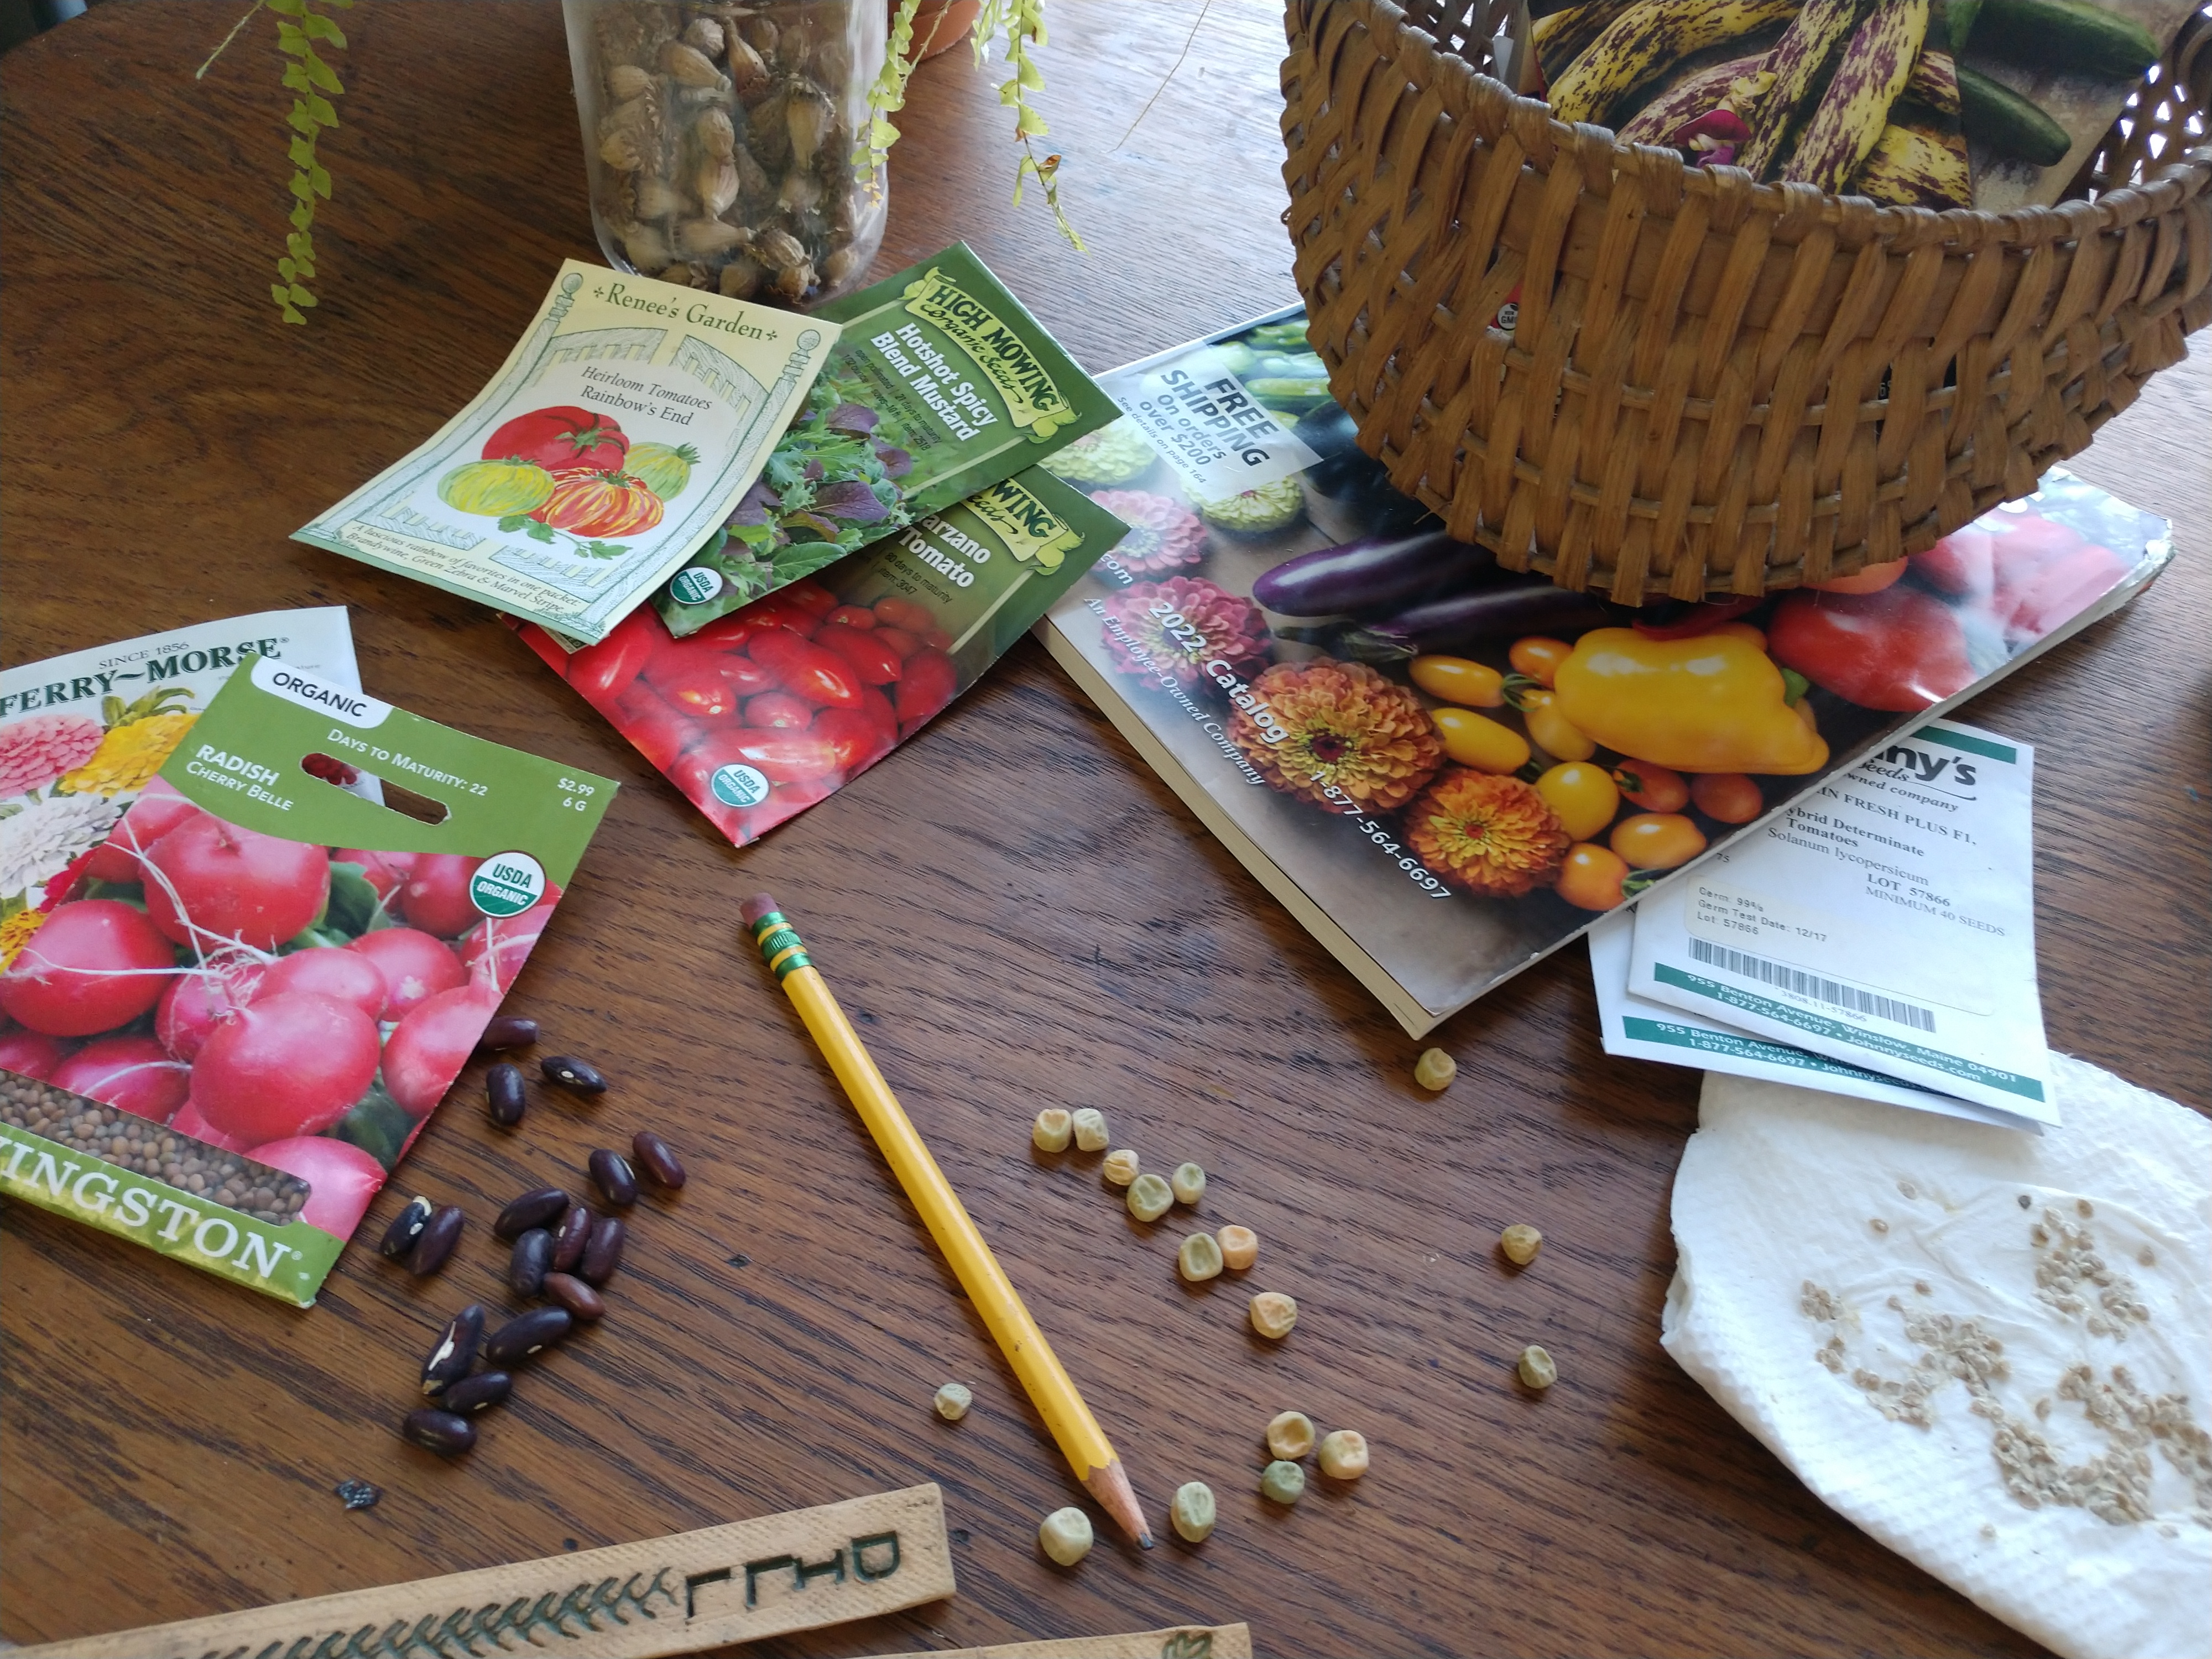 Photo of various plant seeds and gardening material on a table.